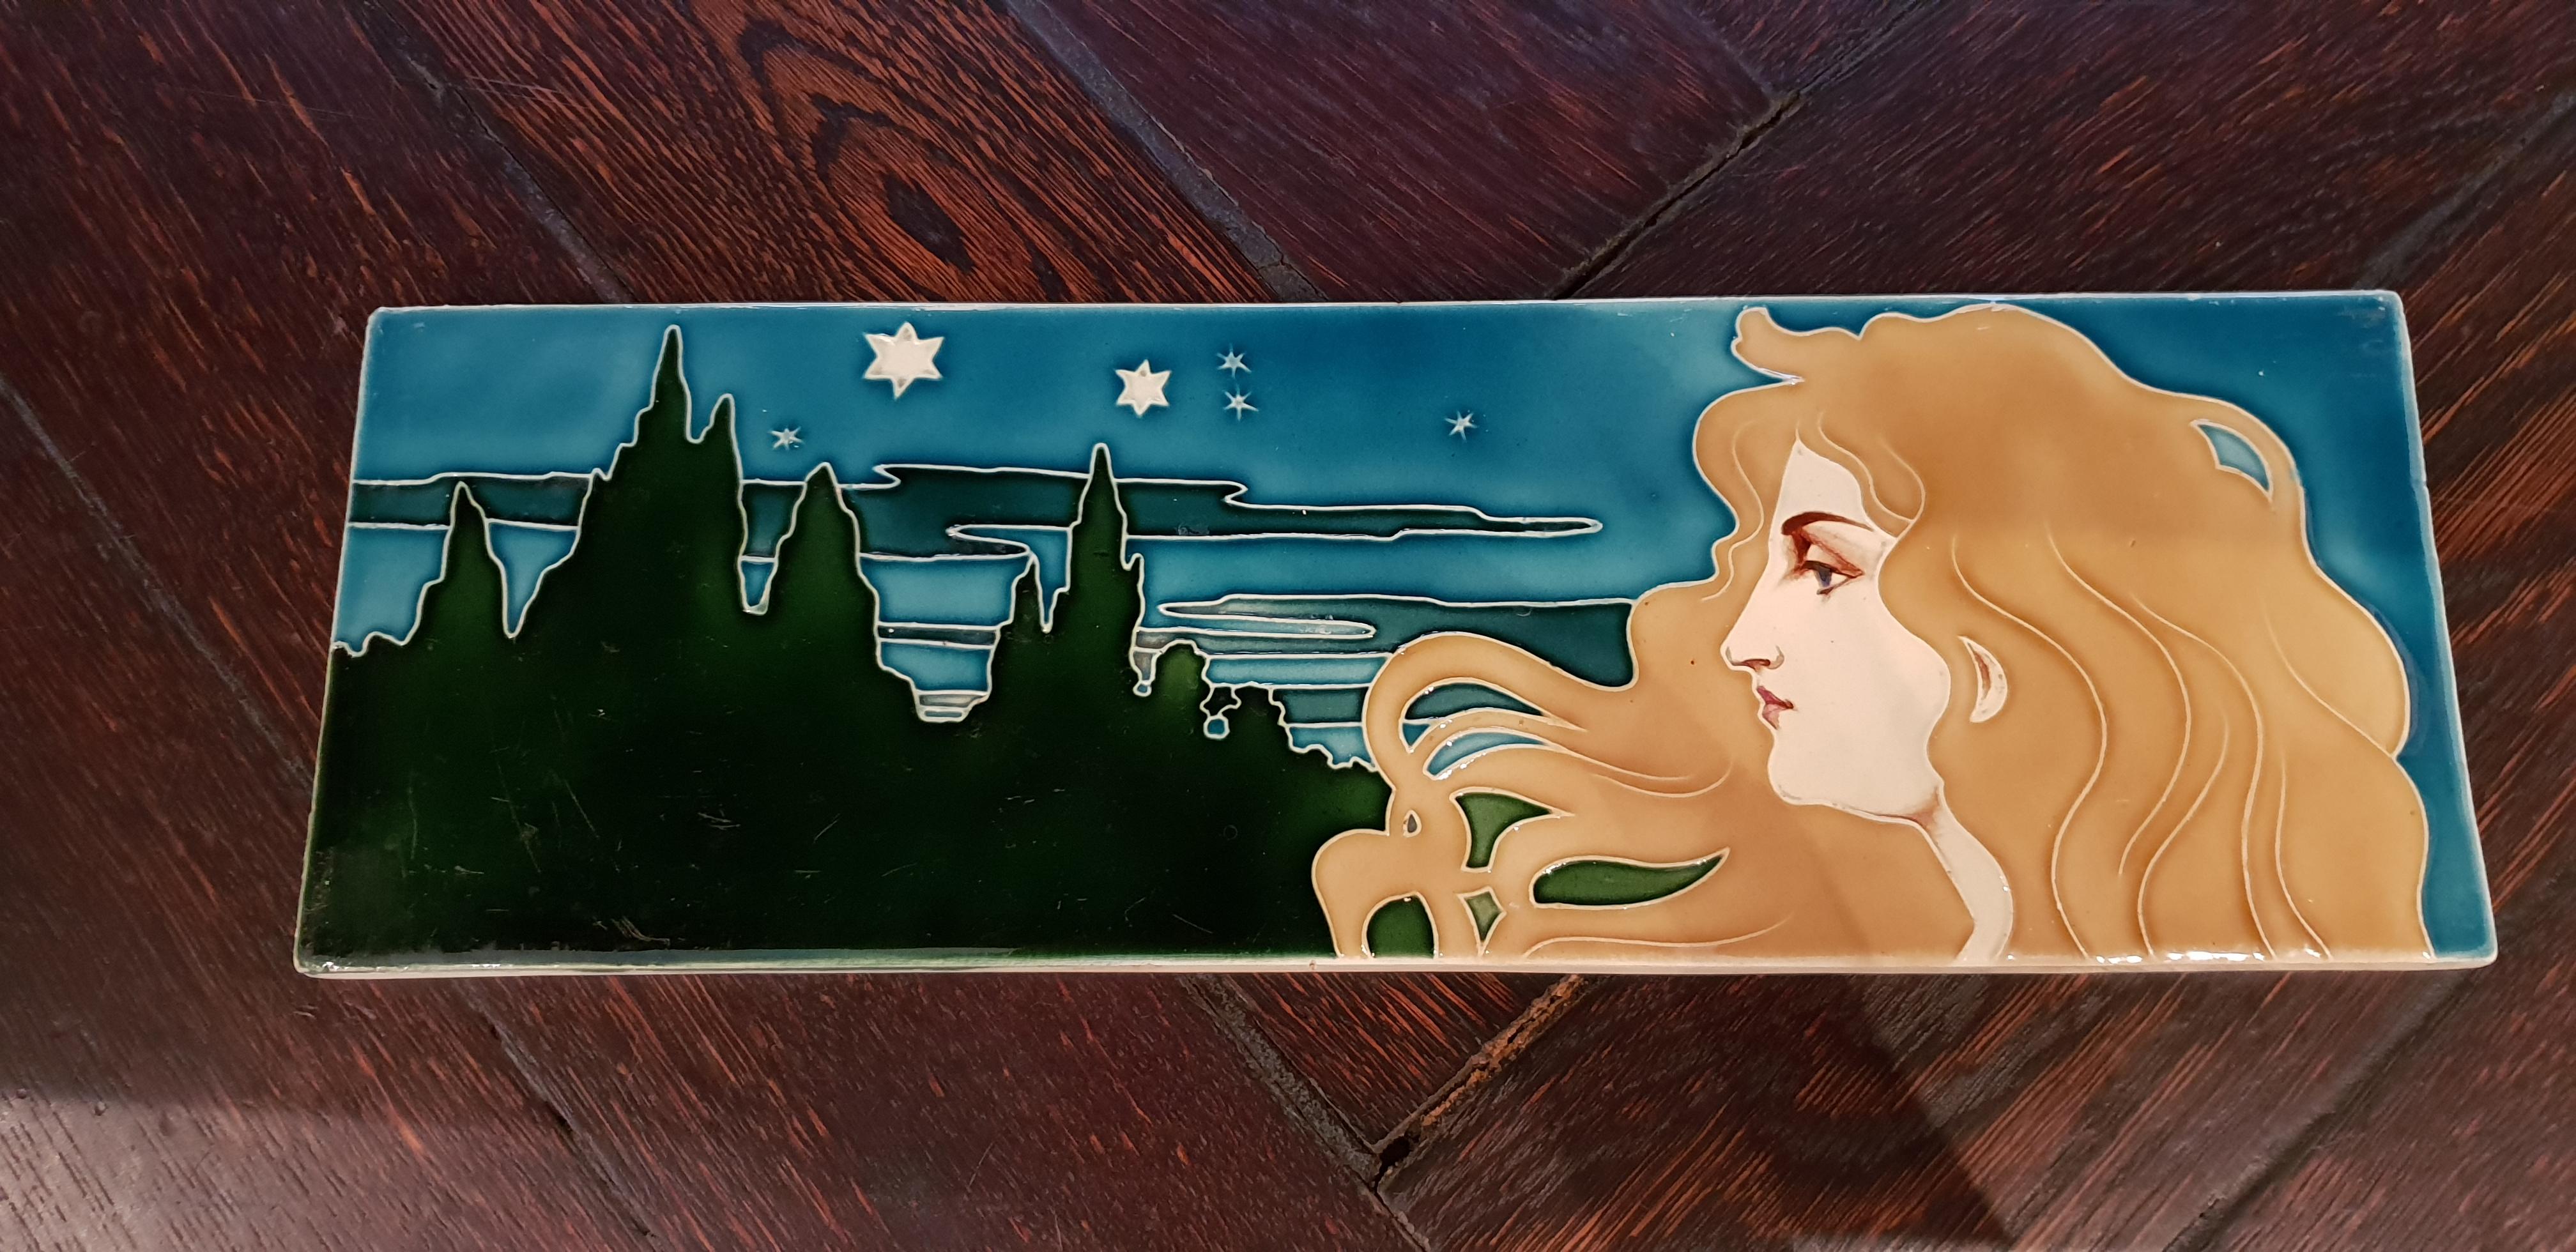 Art Nouveau ceramic tile, circa 1900. Designed by Carl Sigmund Luber (1896-1934), Germany. Manufactured by Johann von Schwarz, Nuremberg. Stoneware, glazed. The maid face is hand-painted. Numbered on the back: R 663.
Dimensions: 4.72 x 14.17 x 0.39